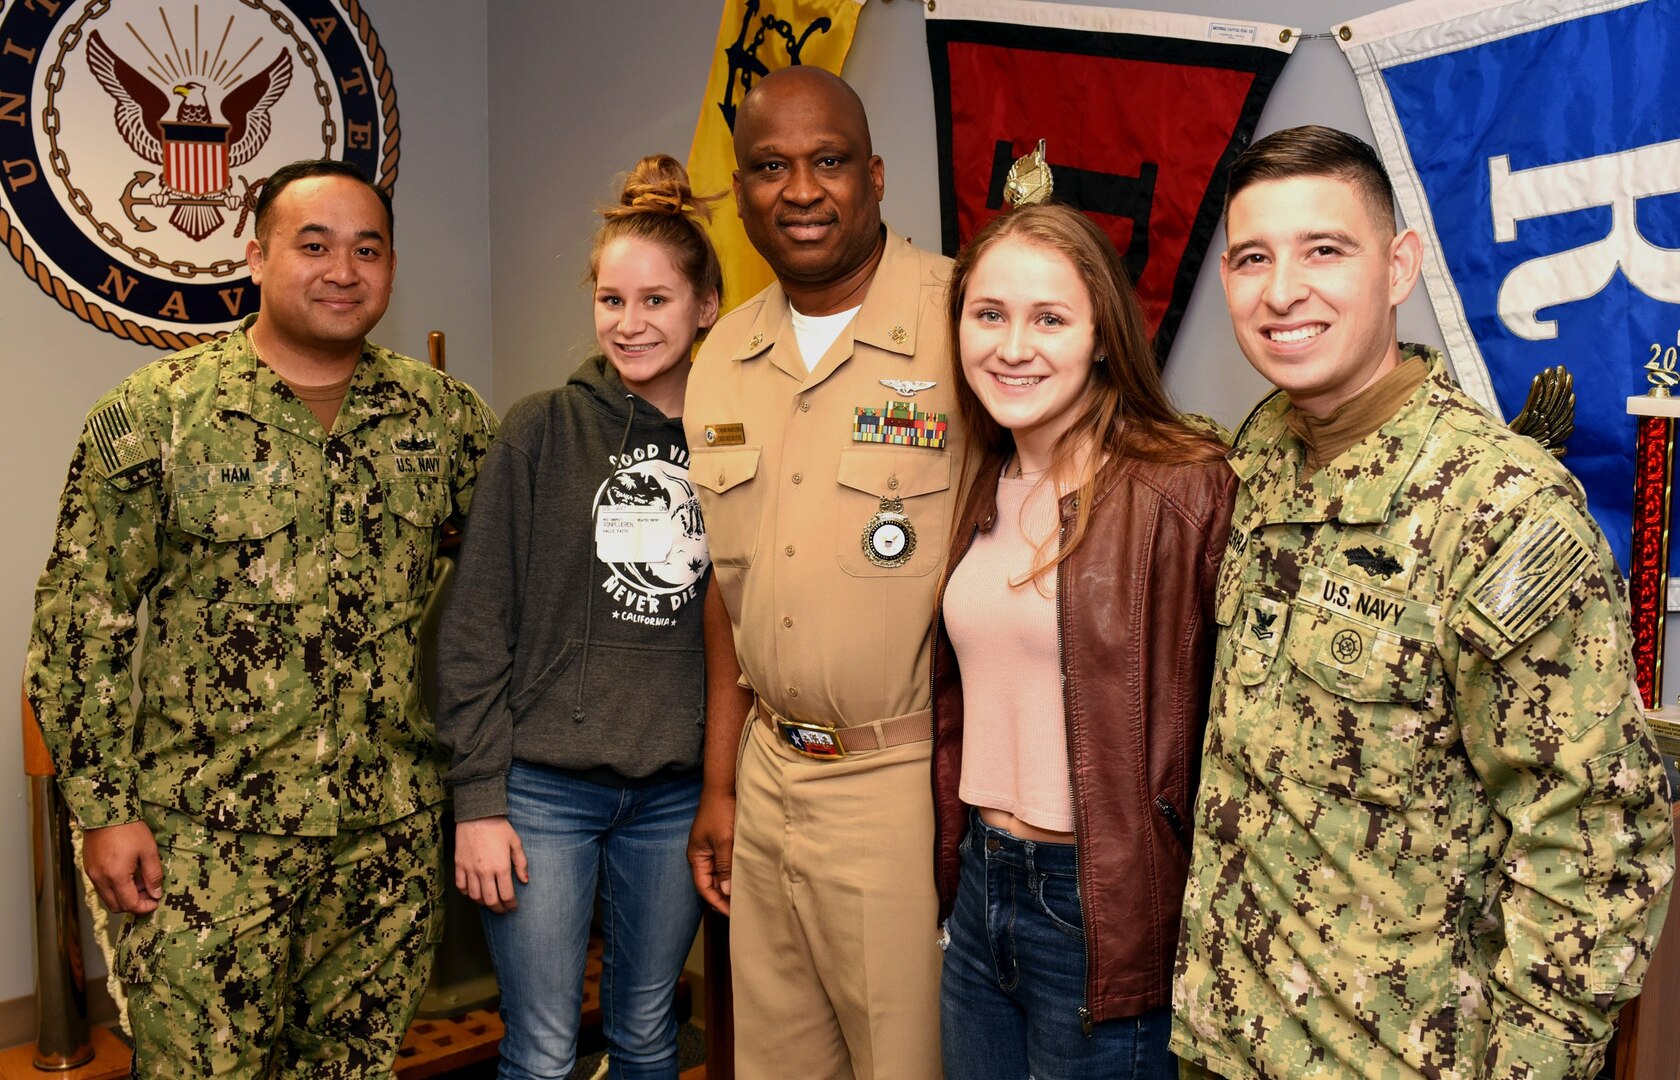 (From left) Chief Petty Officer Sambath Ham, Navy Recruiting Station North East; future Sailor Halle Von Plueren; Master Chief Petty Officer Matthew Maduemesi, chief recruiter of Navy Recruiting District San Antonio; future Sailor Hanna Von Plueren; and Petty Officer 2nd Class Francisco Sierra of NRS North East, pose for photos at NRD San Antonio headquarters at Joint Base San Antonio-Fort Sam Houston. Continuing a family tradition of military service, the Von Pluerens of San Antonio, who are fraternal twins, are joining America’s Navy.